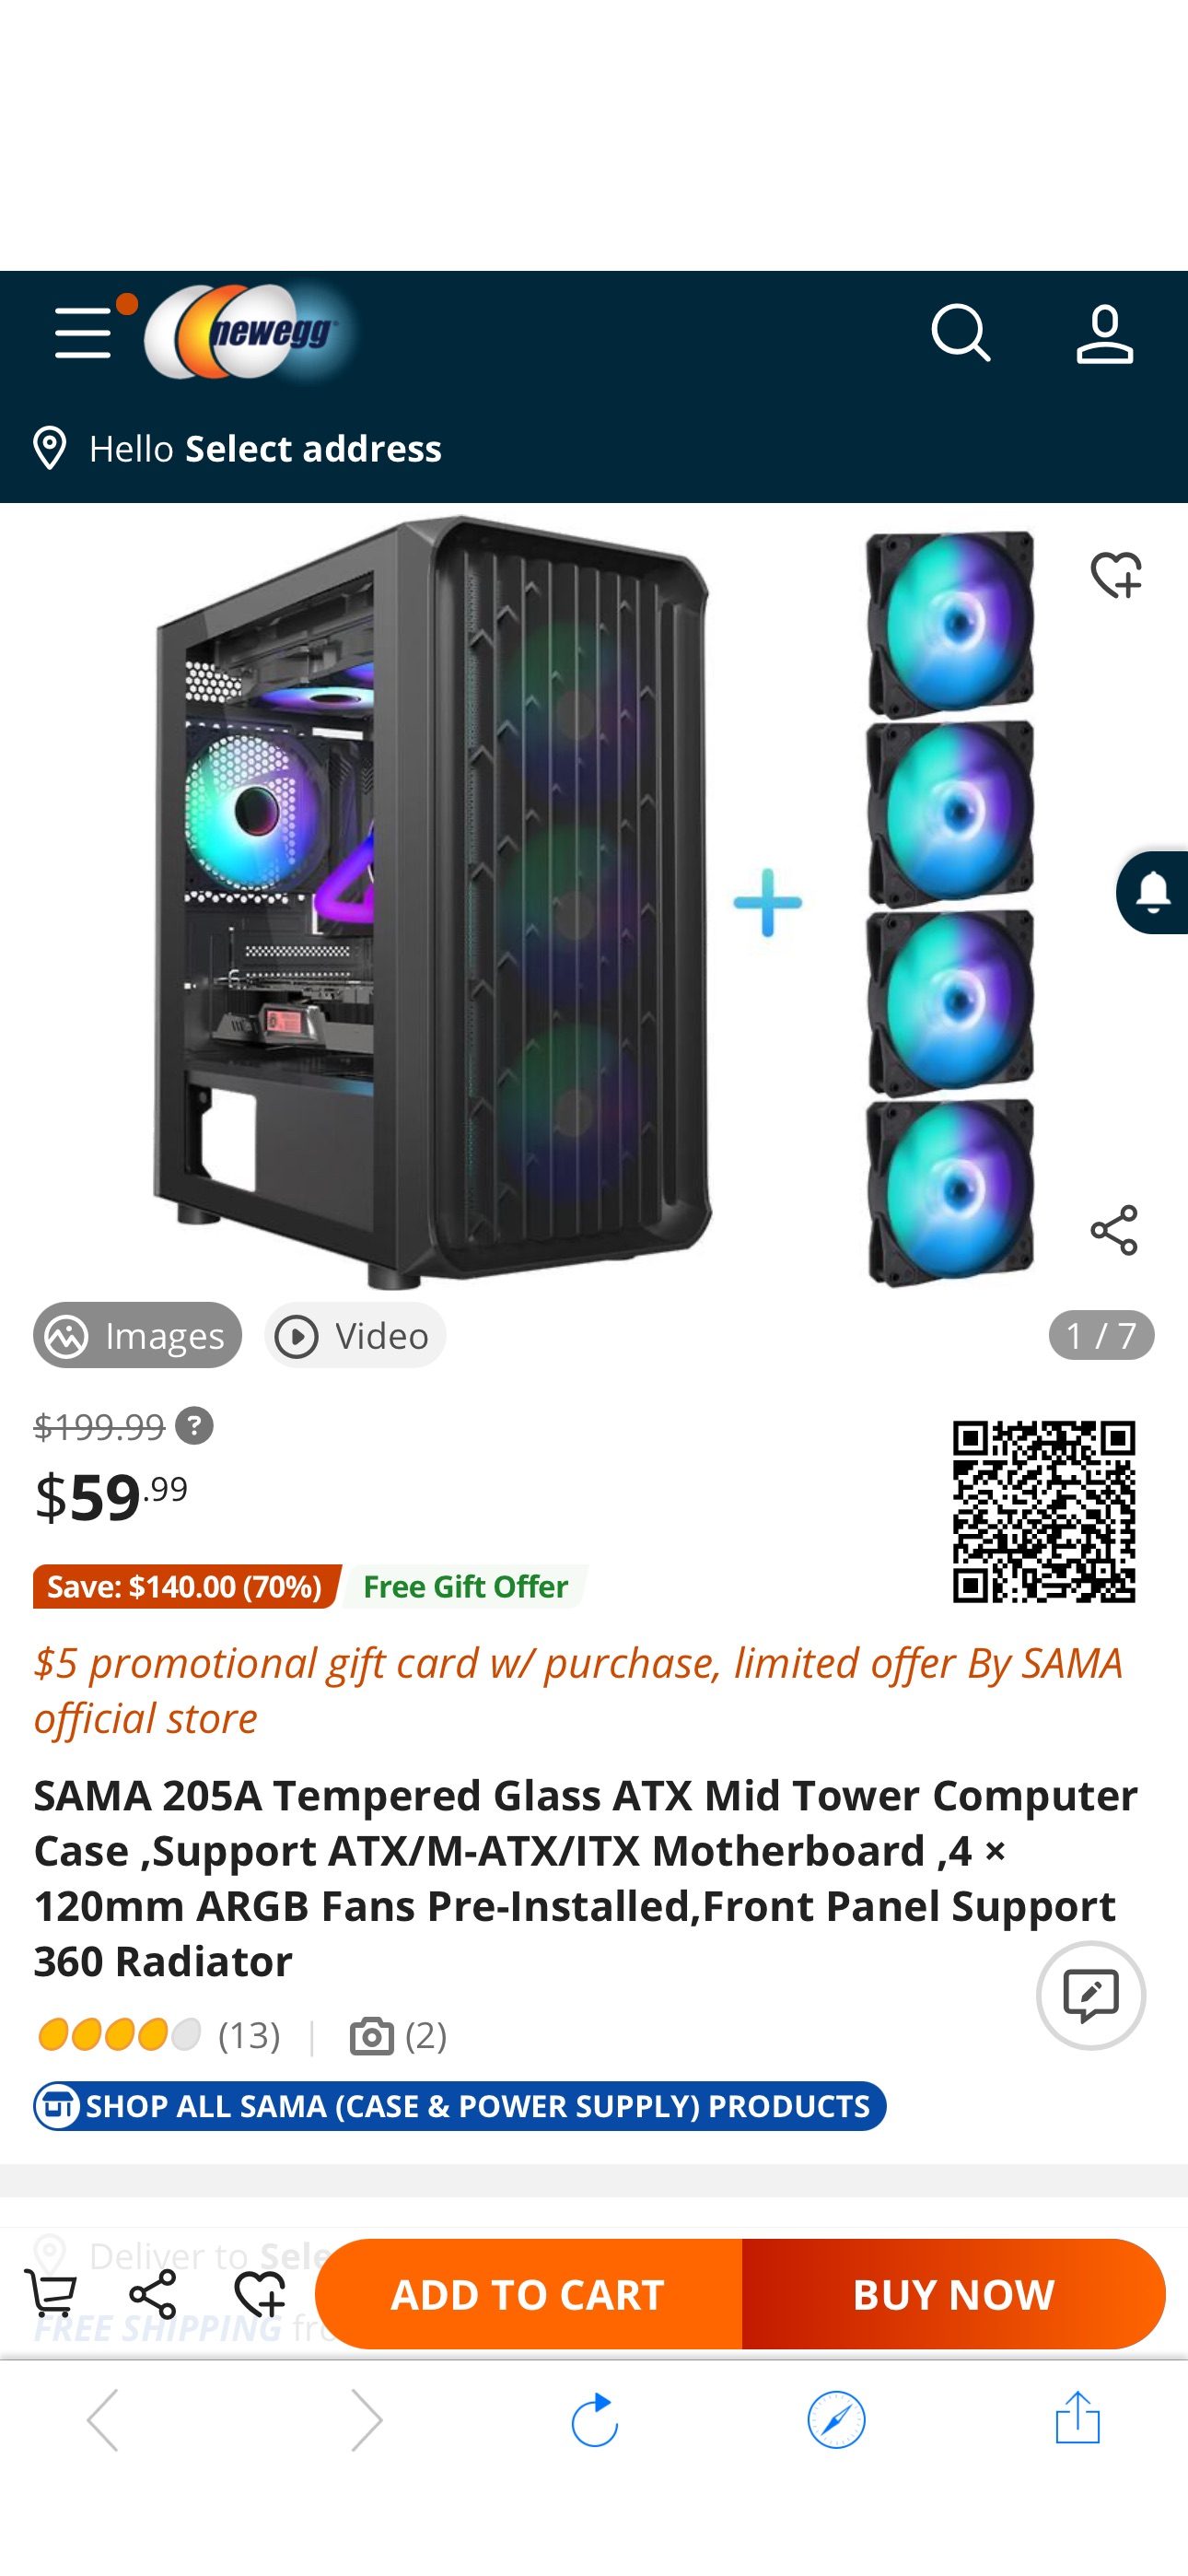 SAMA 205A Tempered Glass ATX Mid Tower Computer Case ,Support ATX/M-ATX/ITX Motherboard ,4 × 120mm ARGB Fans Pre-Installed,Front Panel Support 360 Radiator - Newegg.com